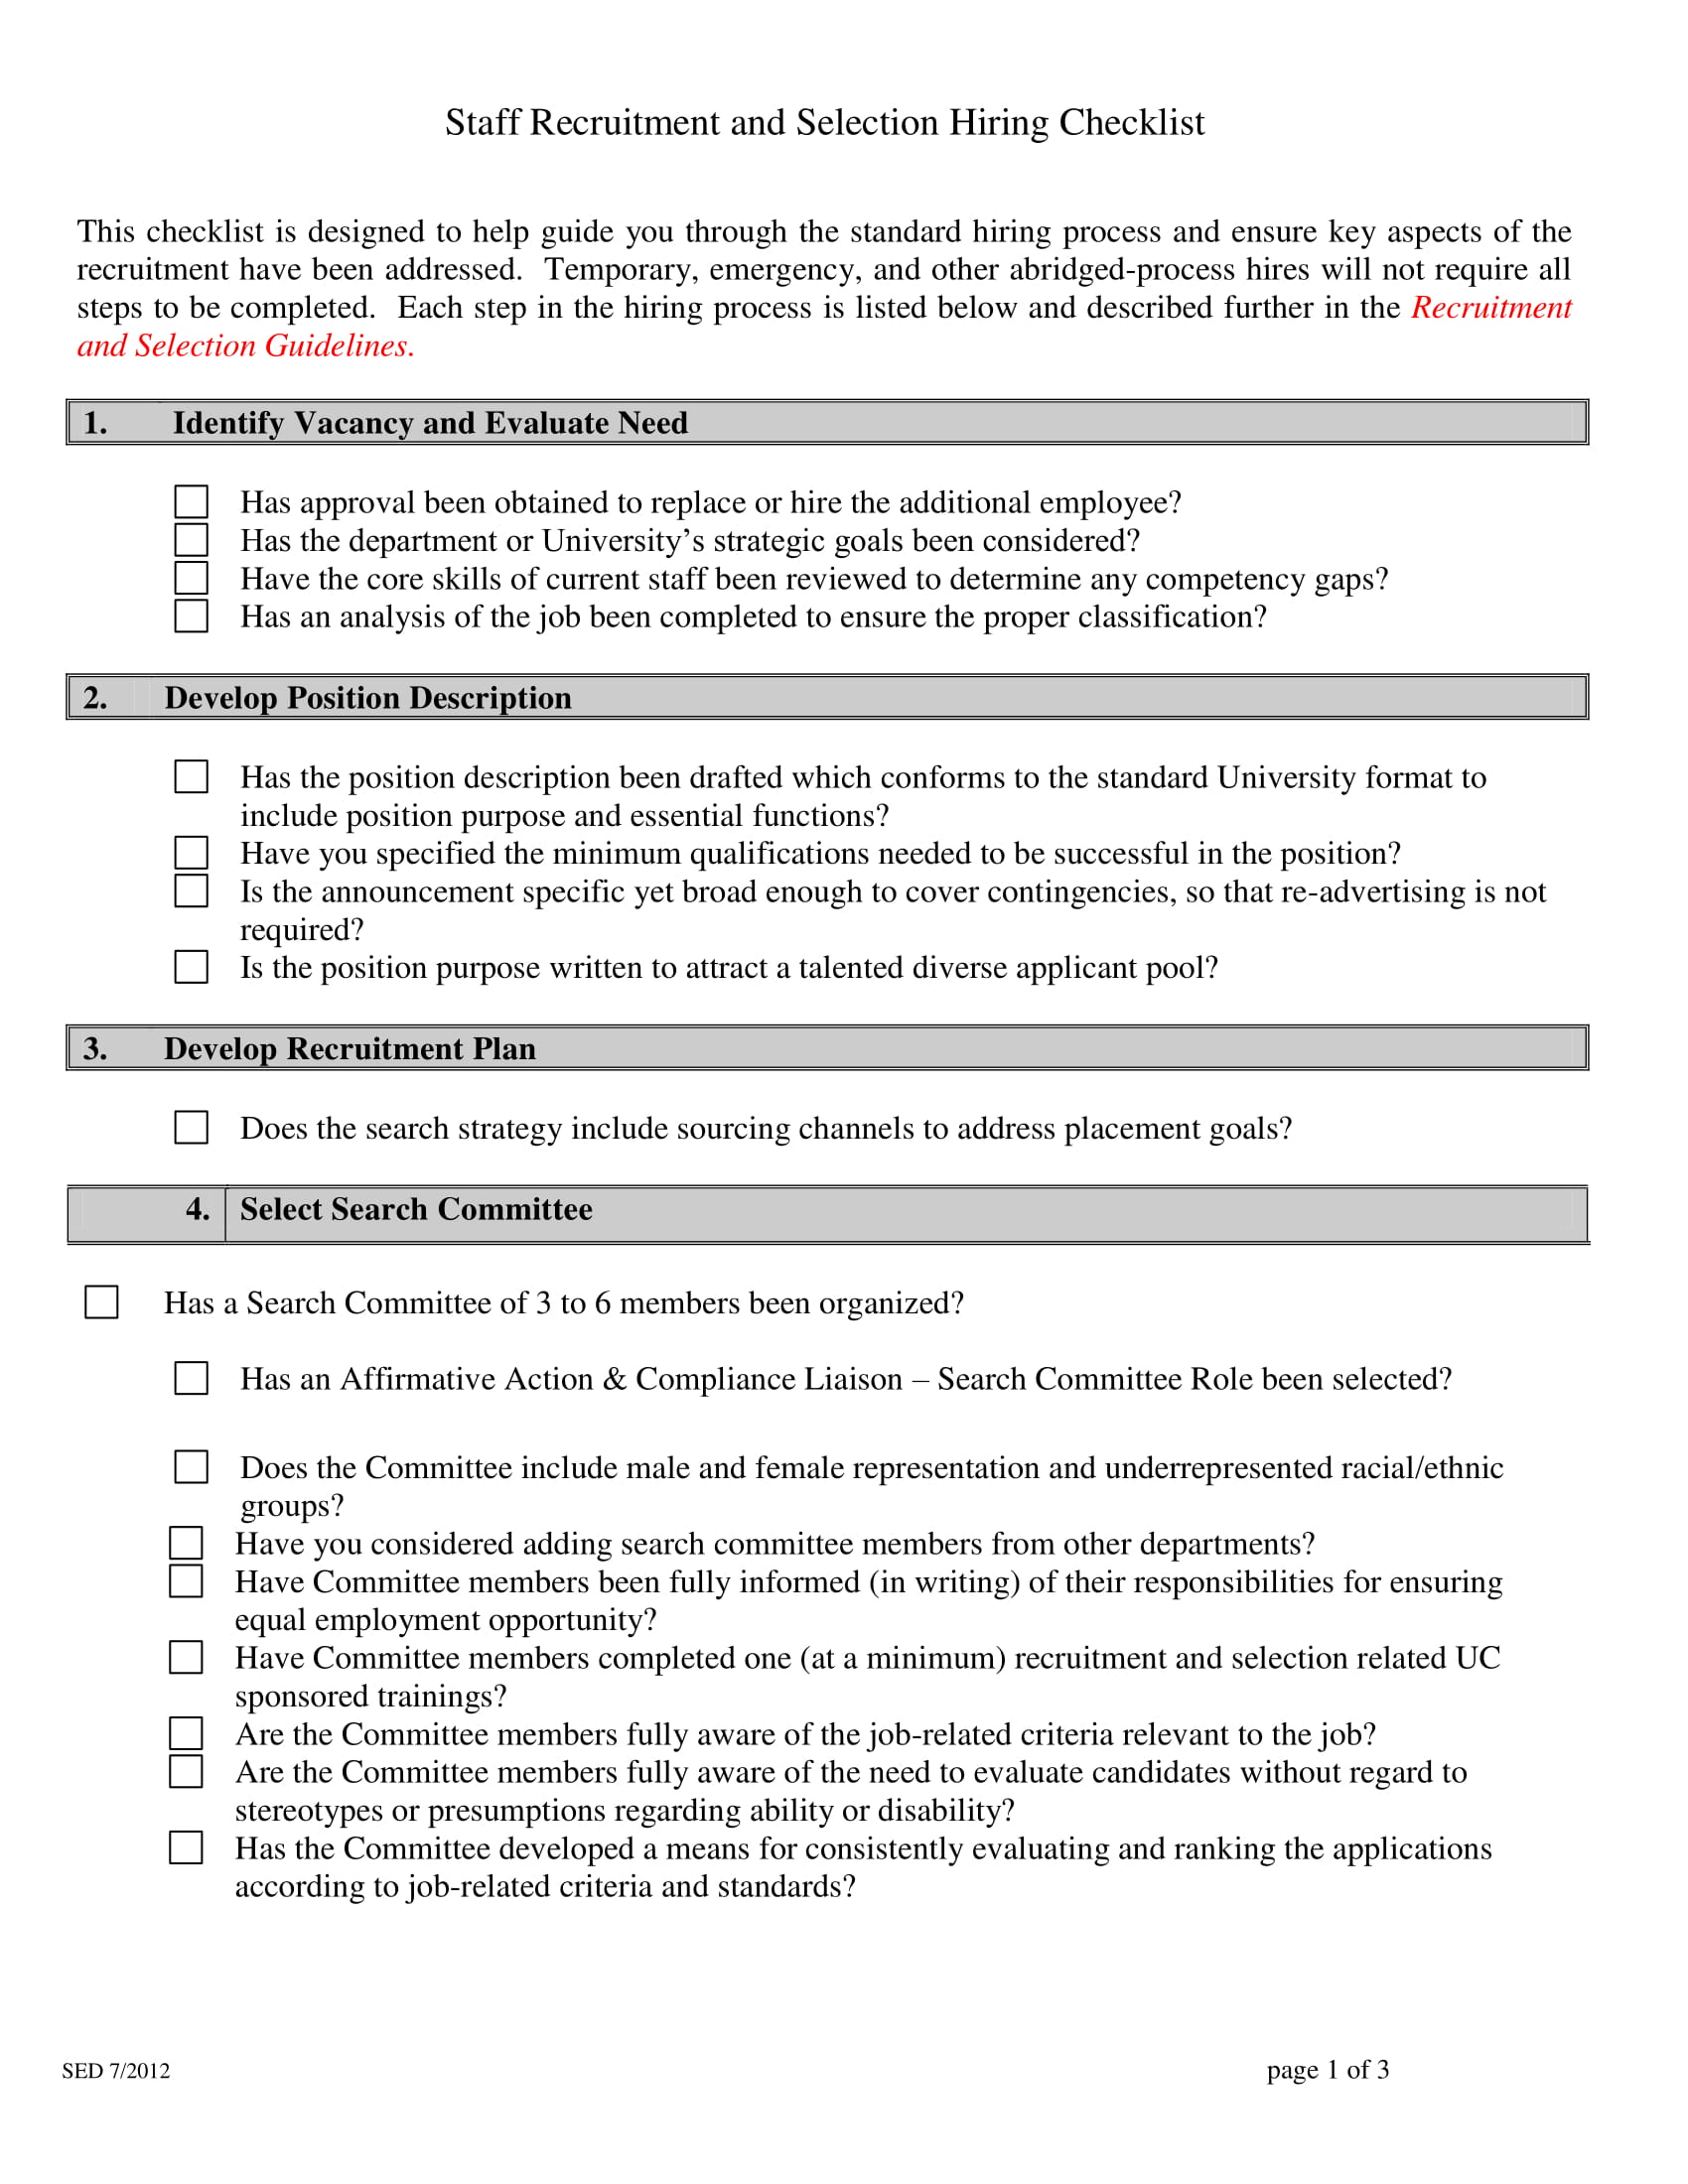 staff recruitment and selection hiring checklist example